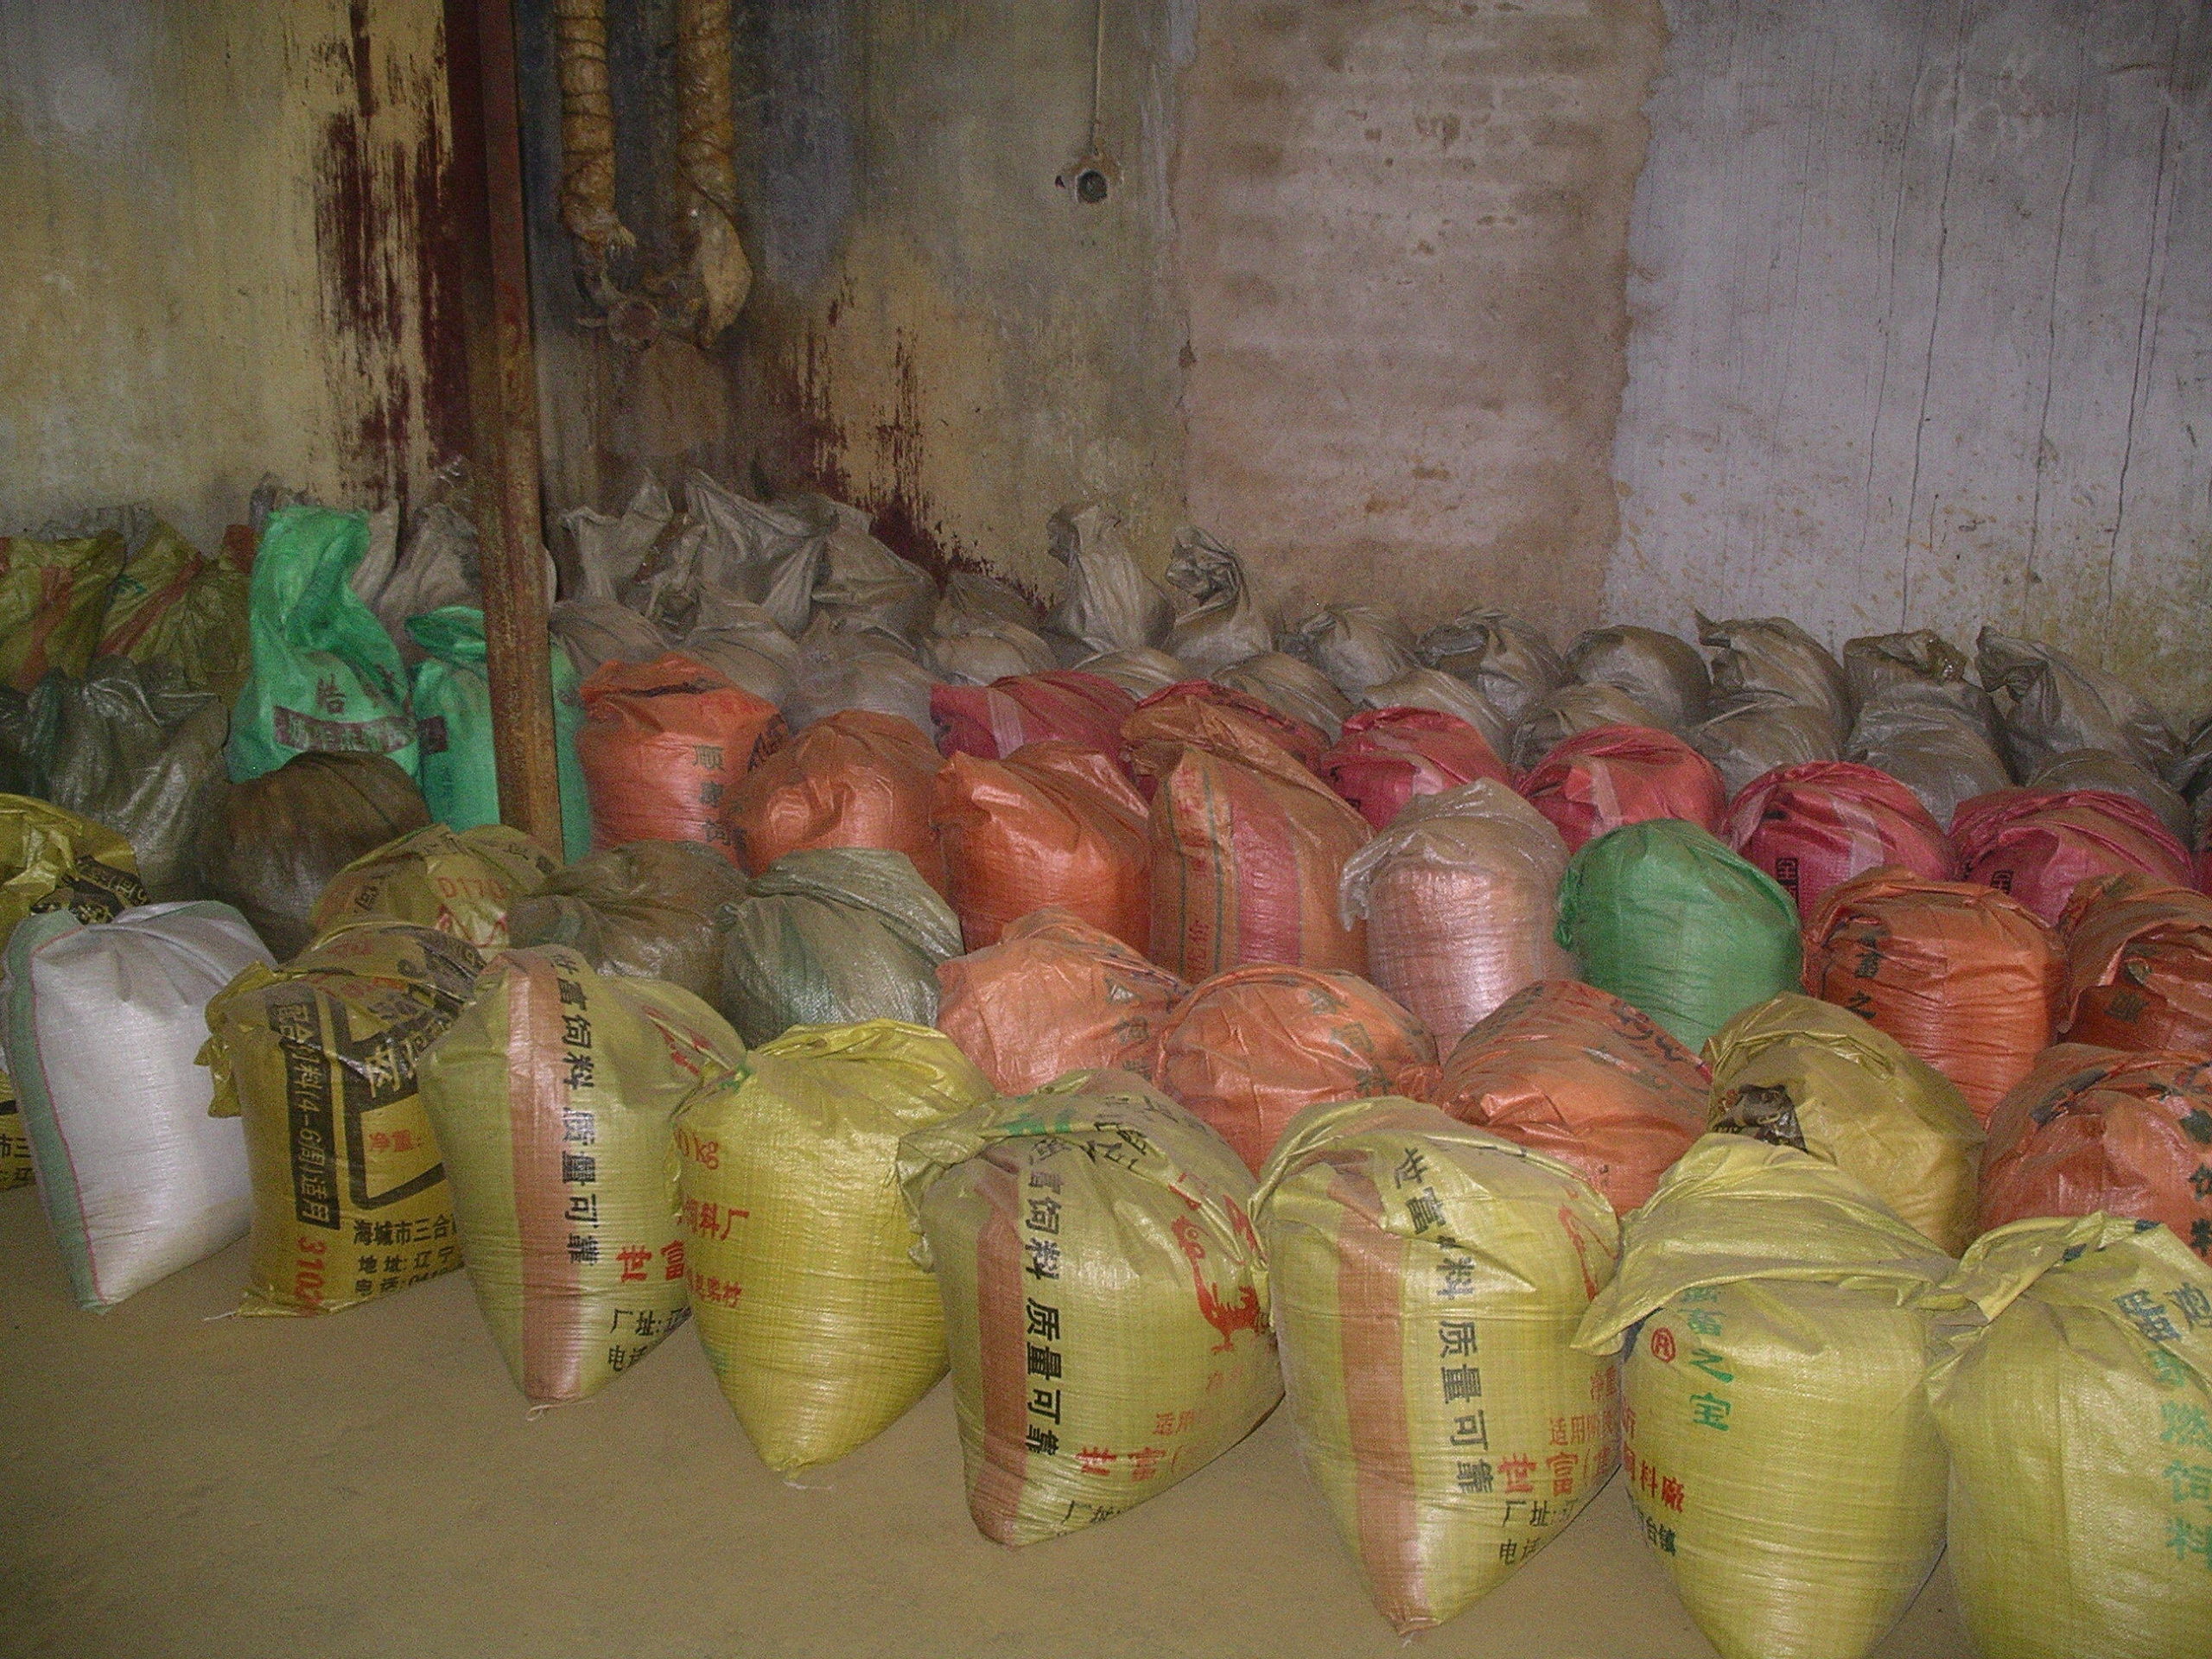 5 or more row of full plastic bags of yellow, pink, and gray color stored on a concrete floor in a large room